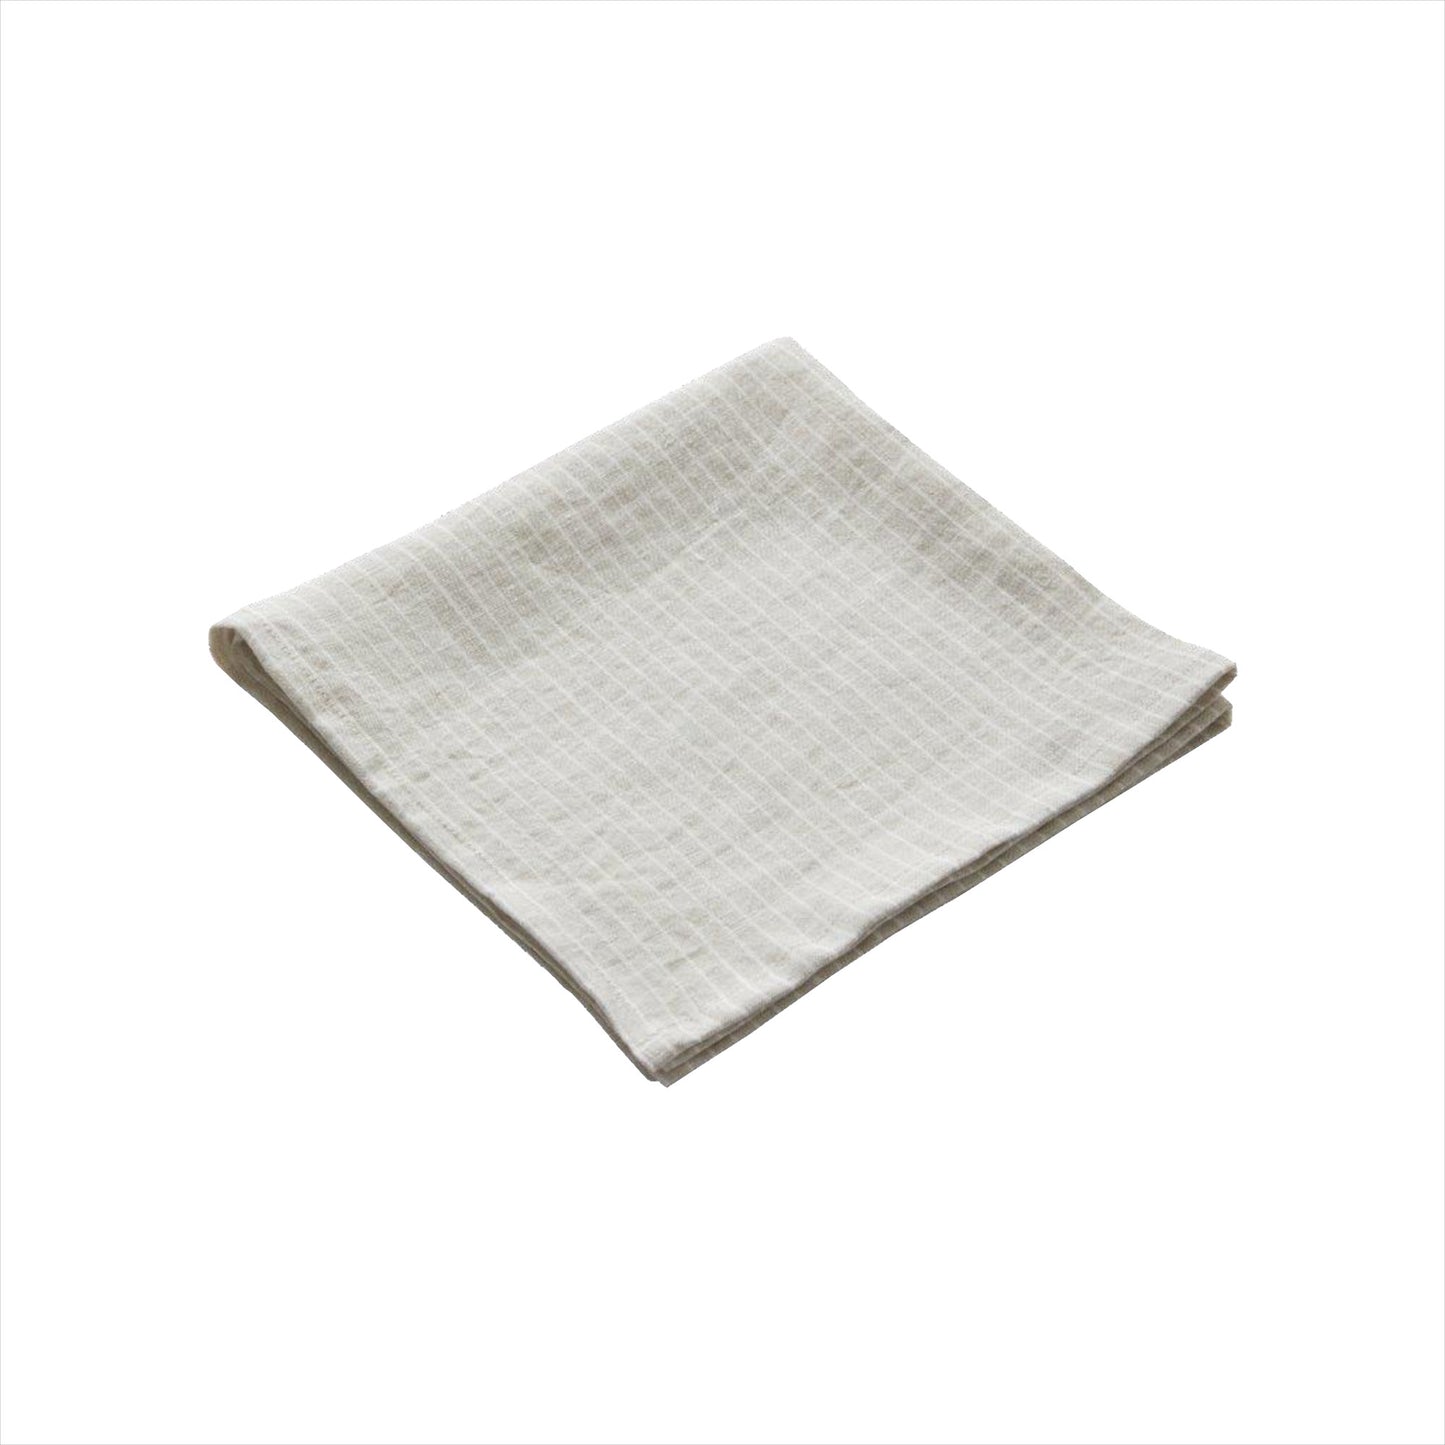 Set 6 napkins in 100% European linen - striped white and natural